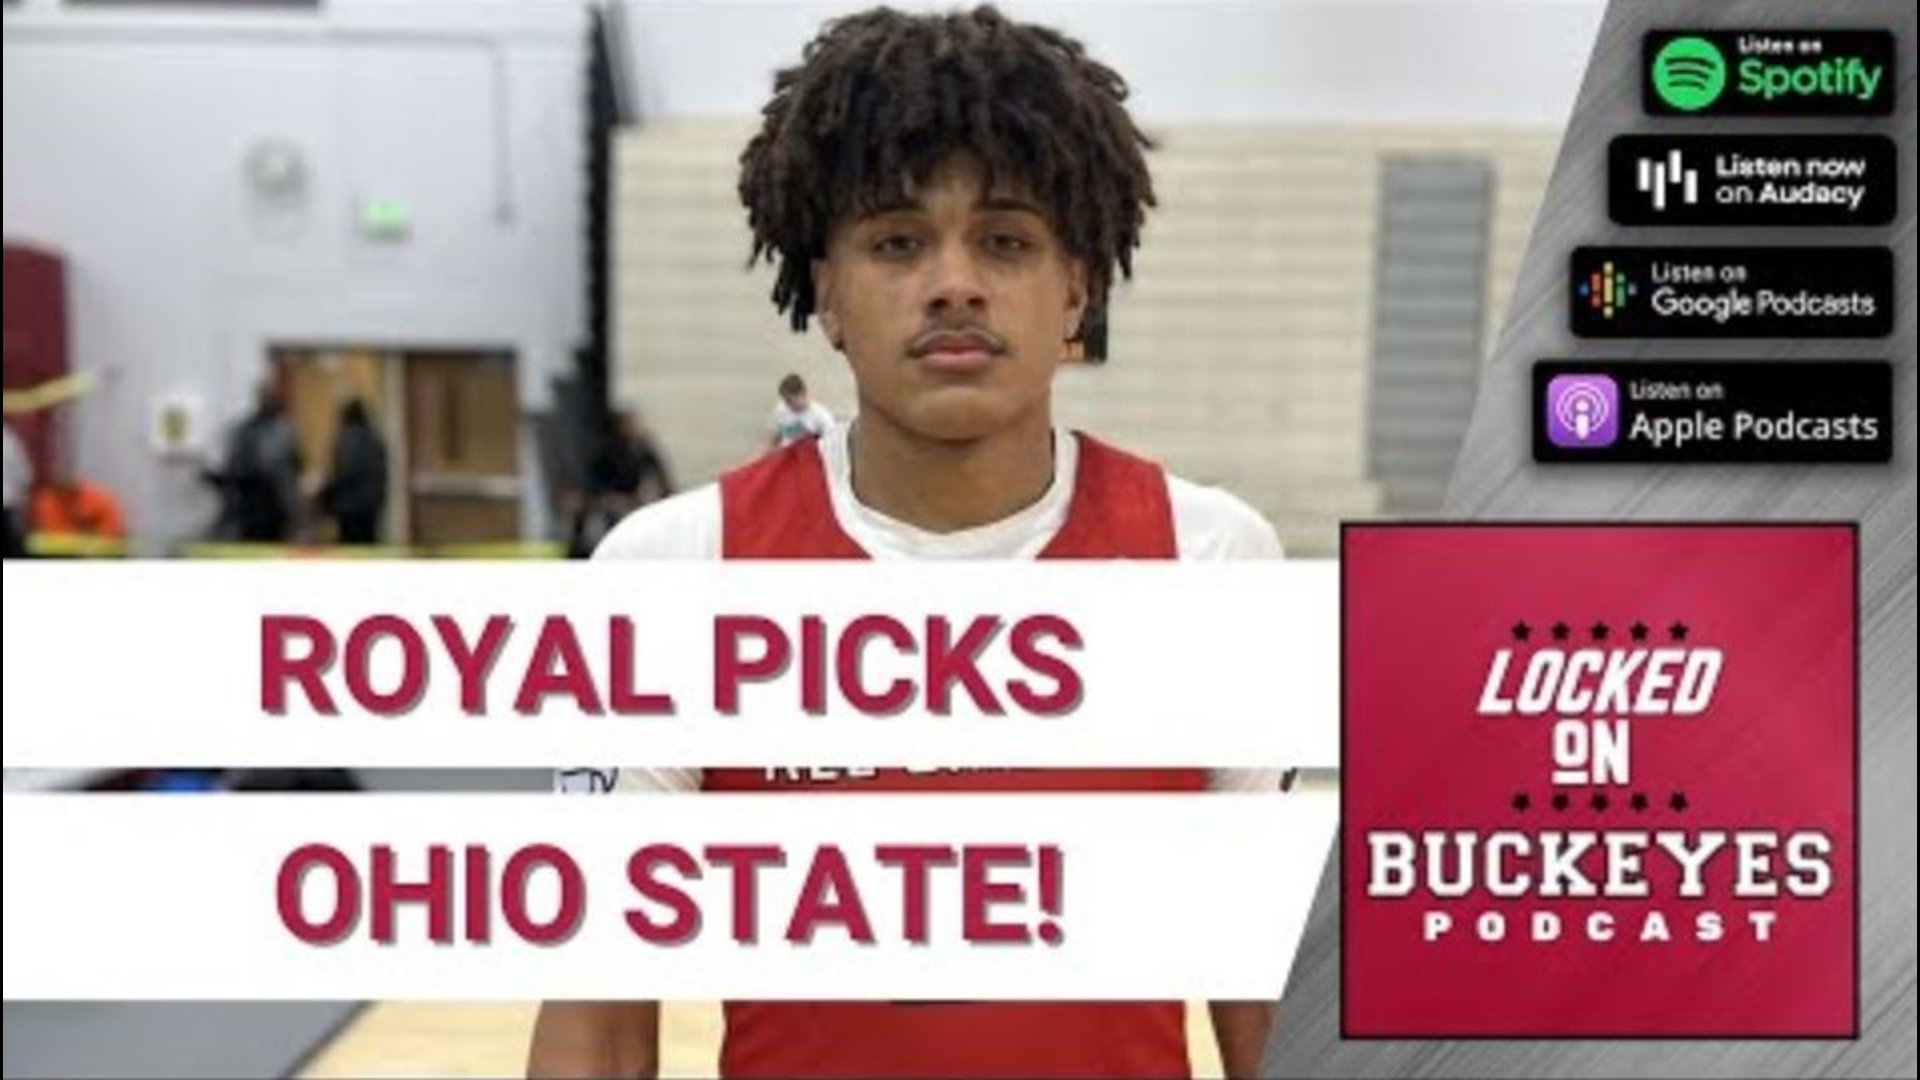 The group gained another member as Devin Royal becomes the last basketball recruit to commit to Ohio State.